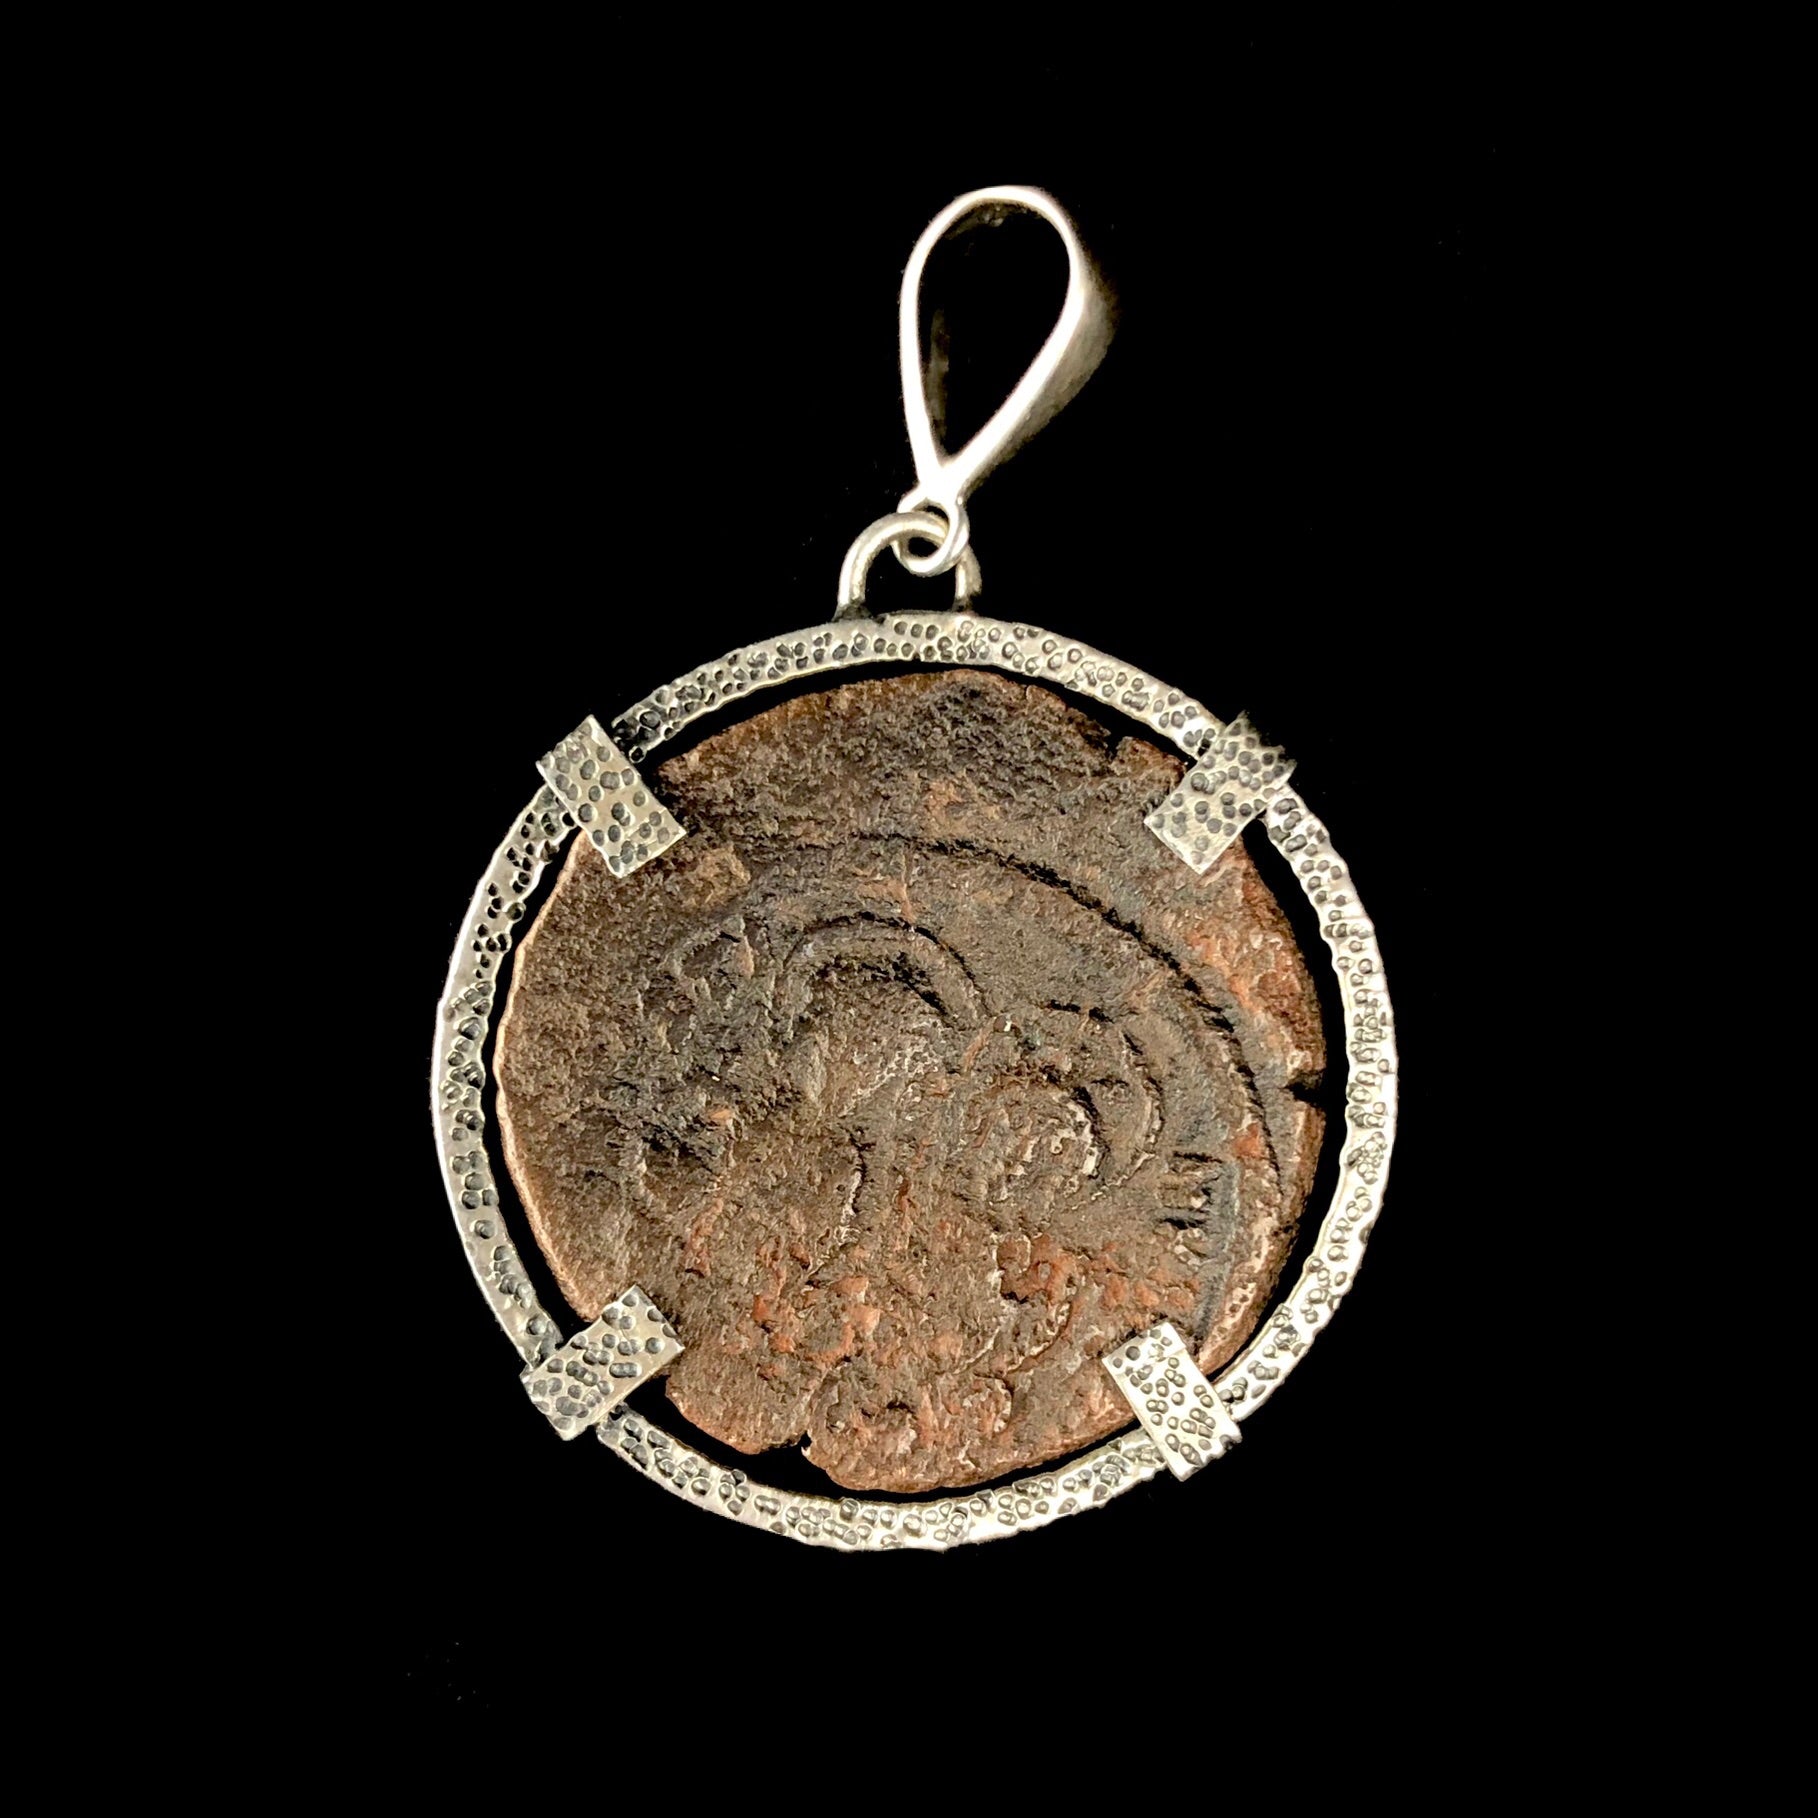 Bronze coin with the faint outline of two figures